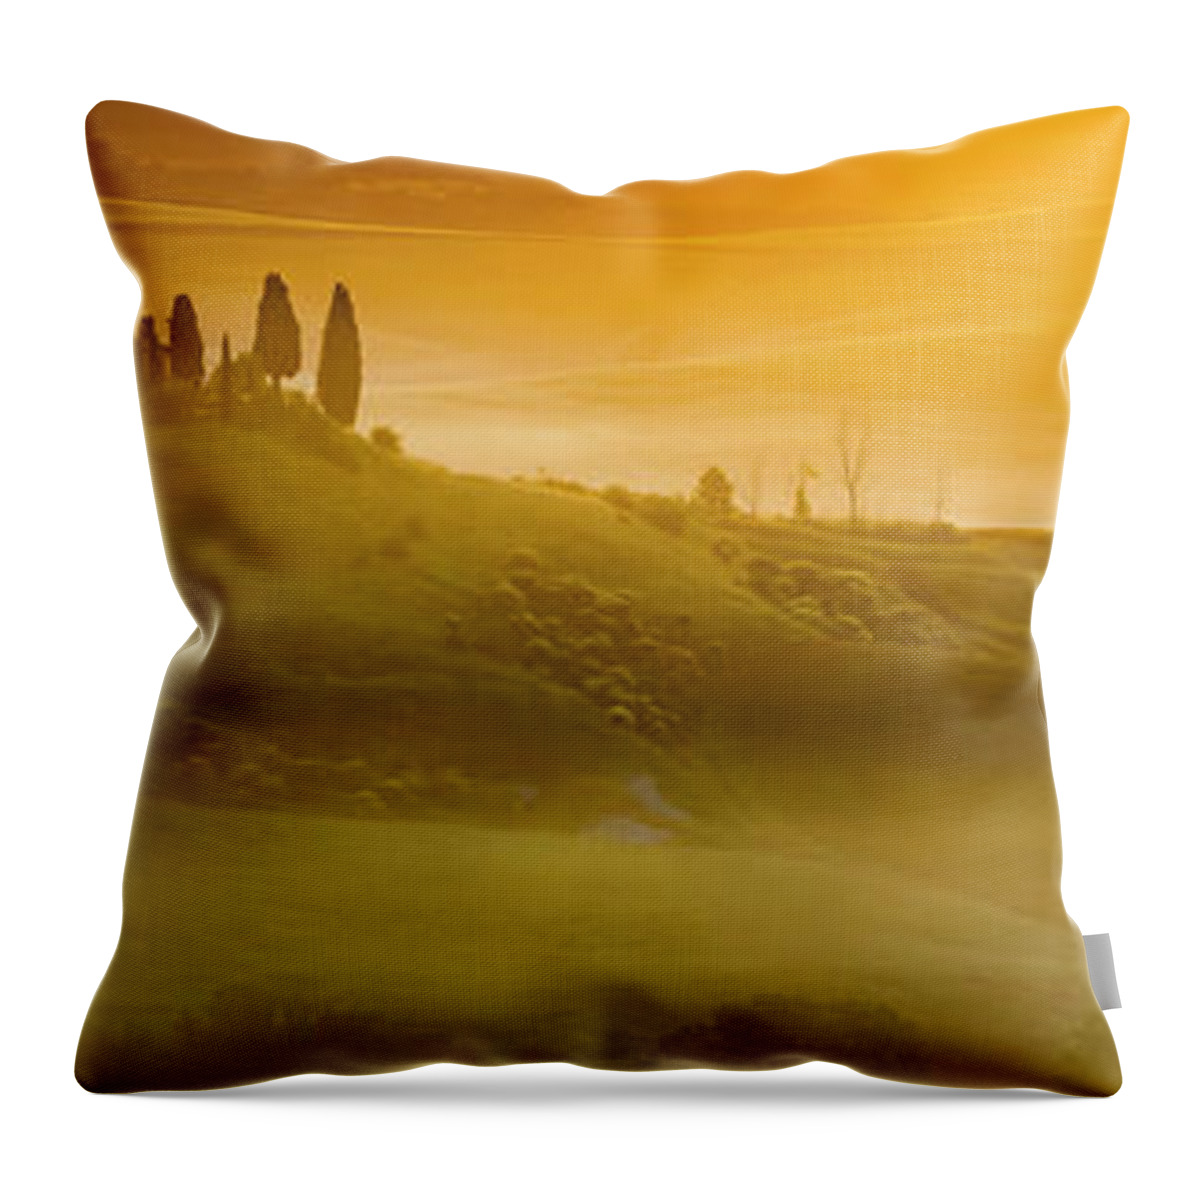 Italy Throw Pillow featuring the photograph Tuscany In Gold by Evgeni Dinev